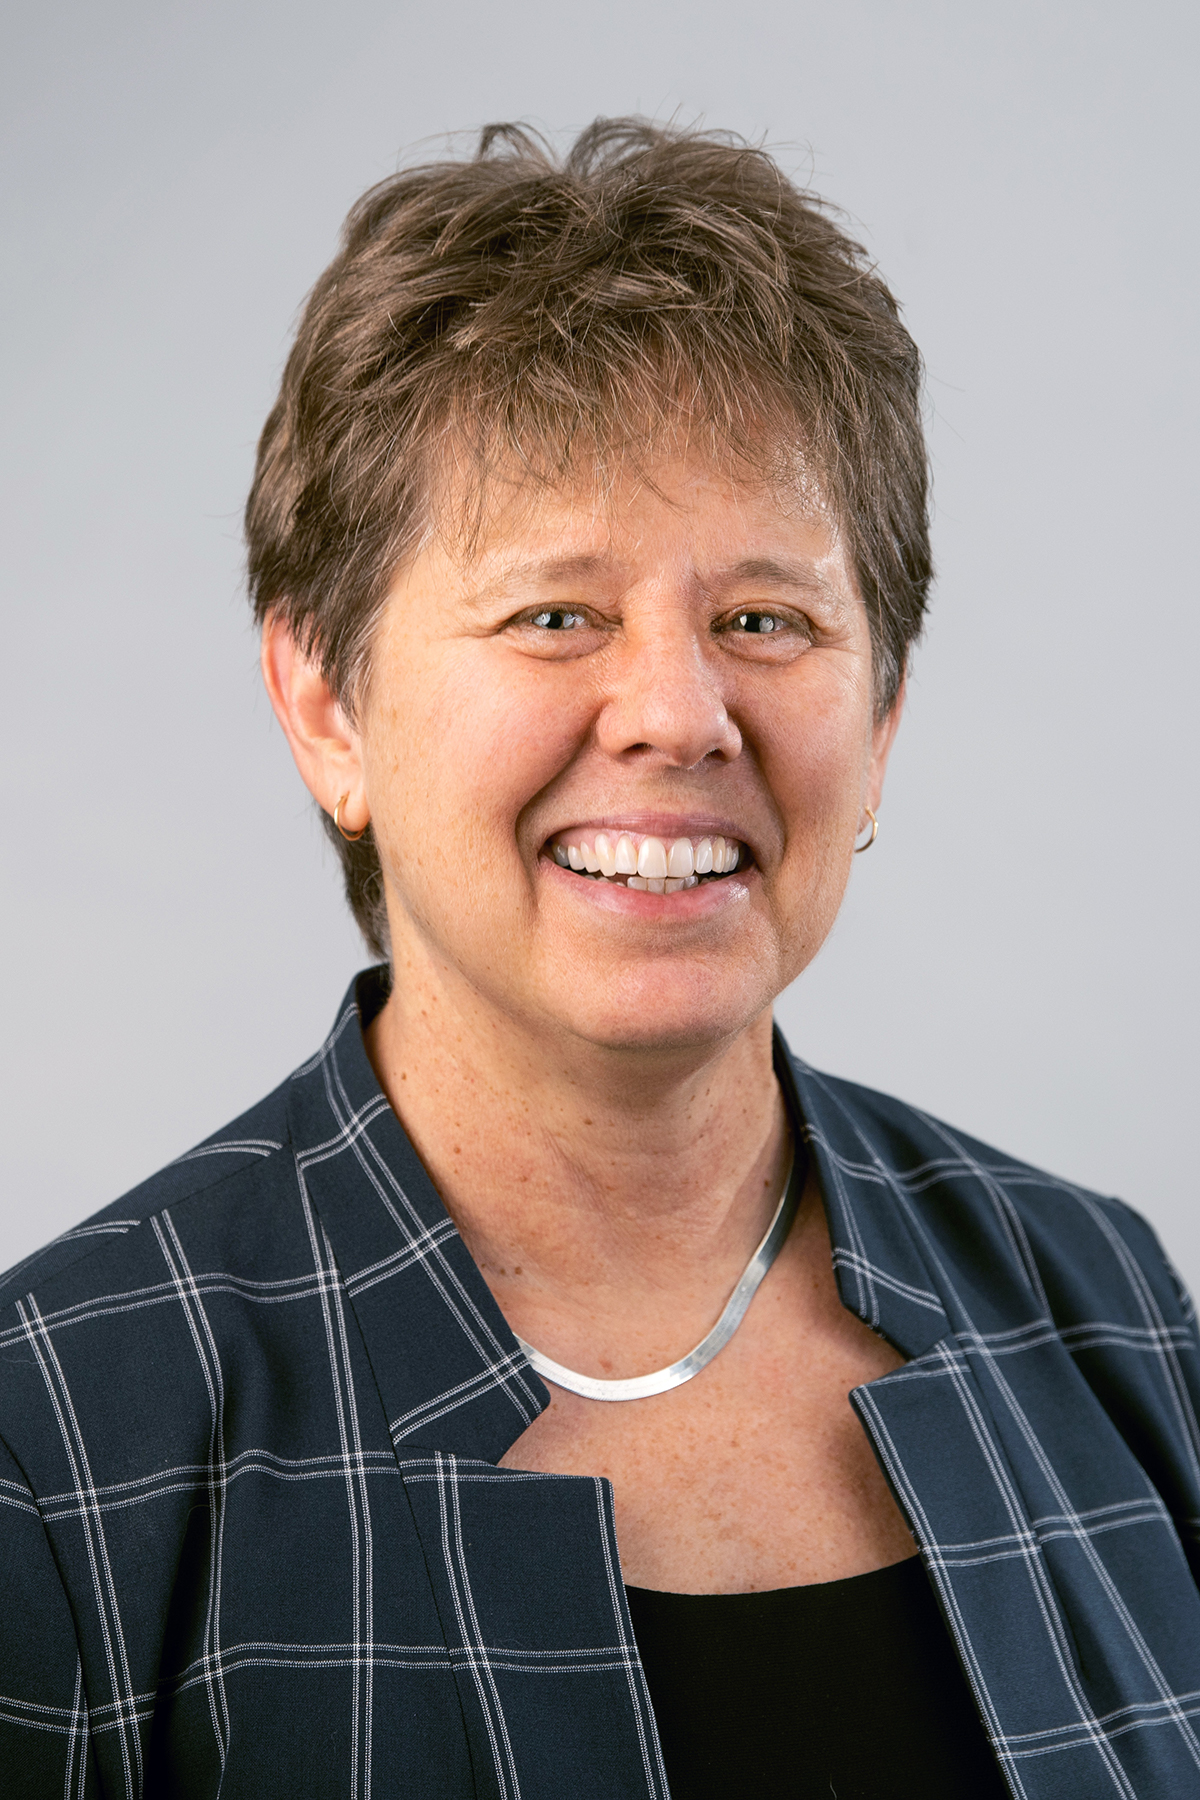 Jill S. Schneiderman wearing a black shirt, patterned dark blue shirt, and thick silver necklace against a light background.